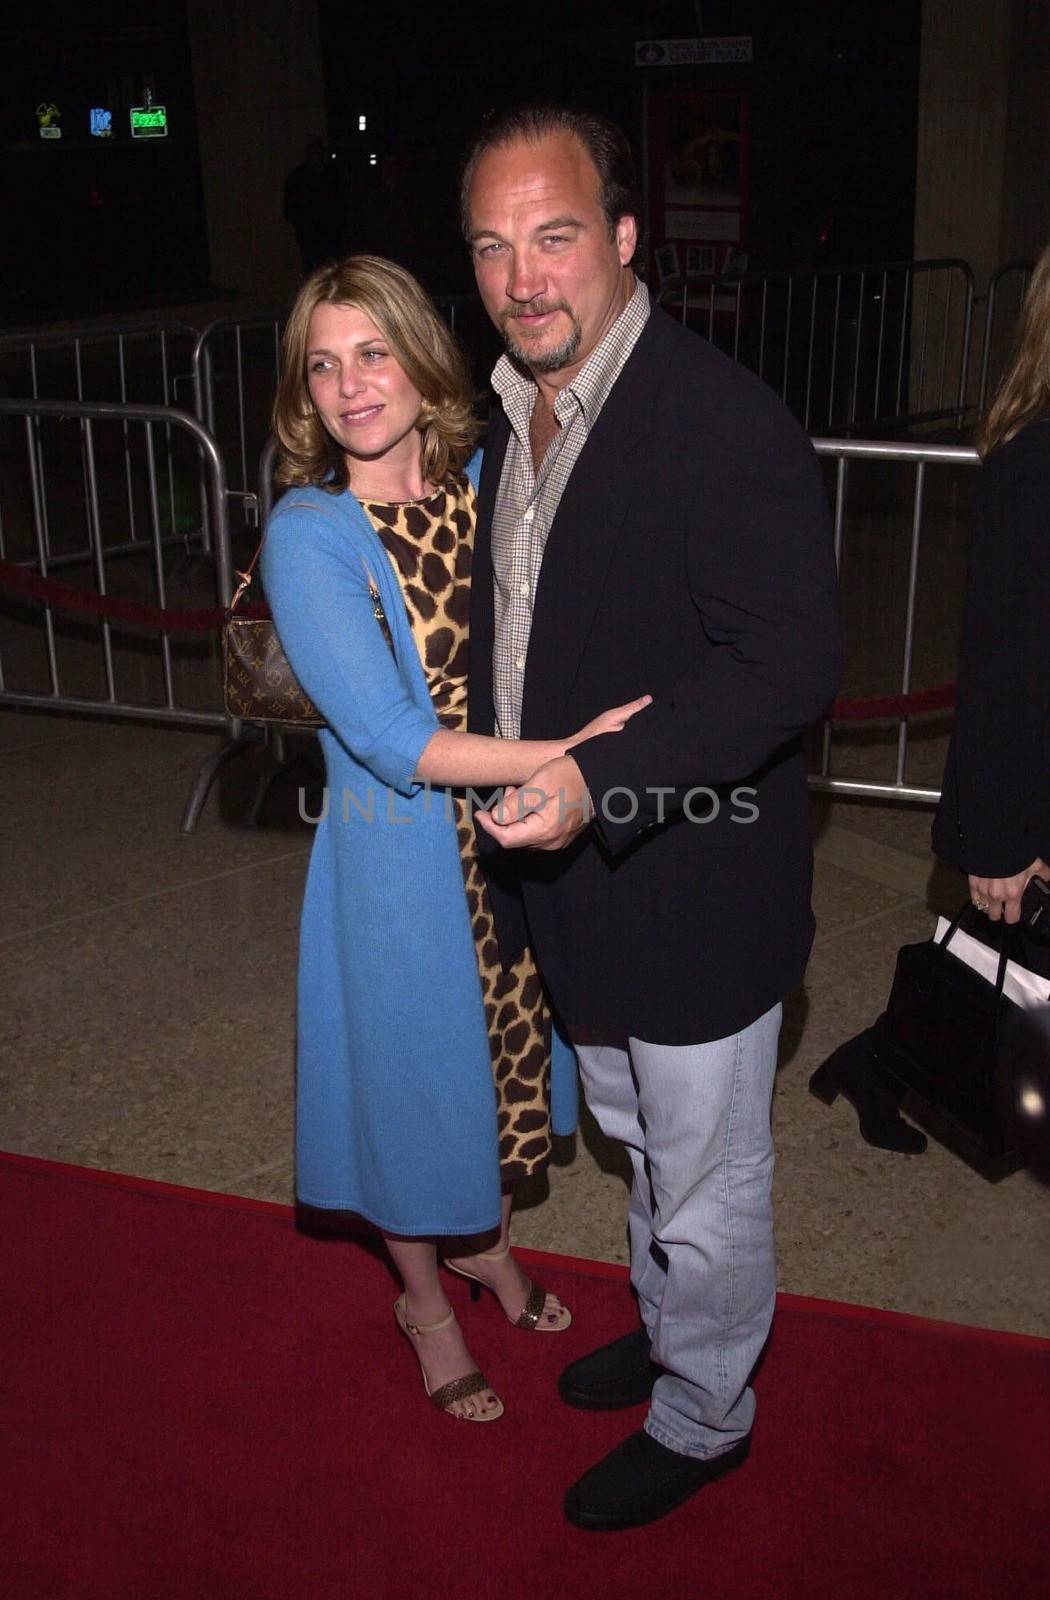 James Belushi and Jennifer Sloan at the premiere of MGM's "RETURN TO ME" in Century City, 04-03-00